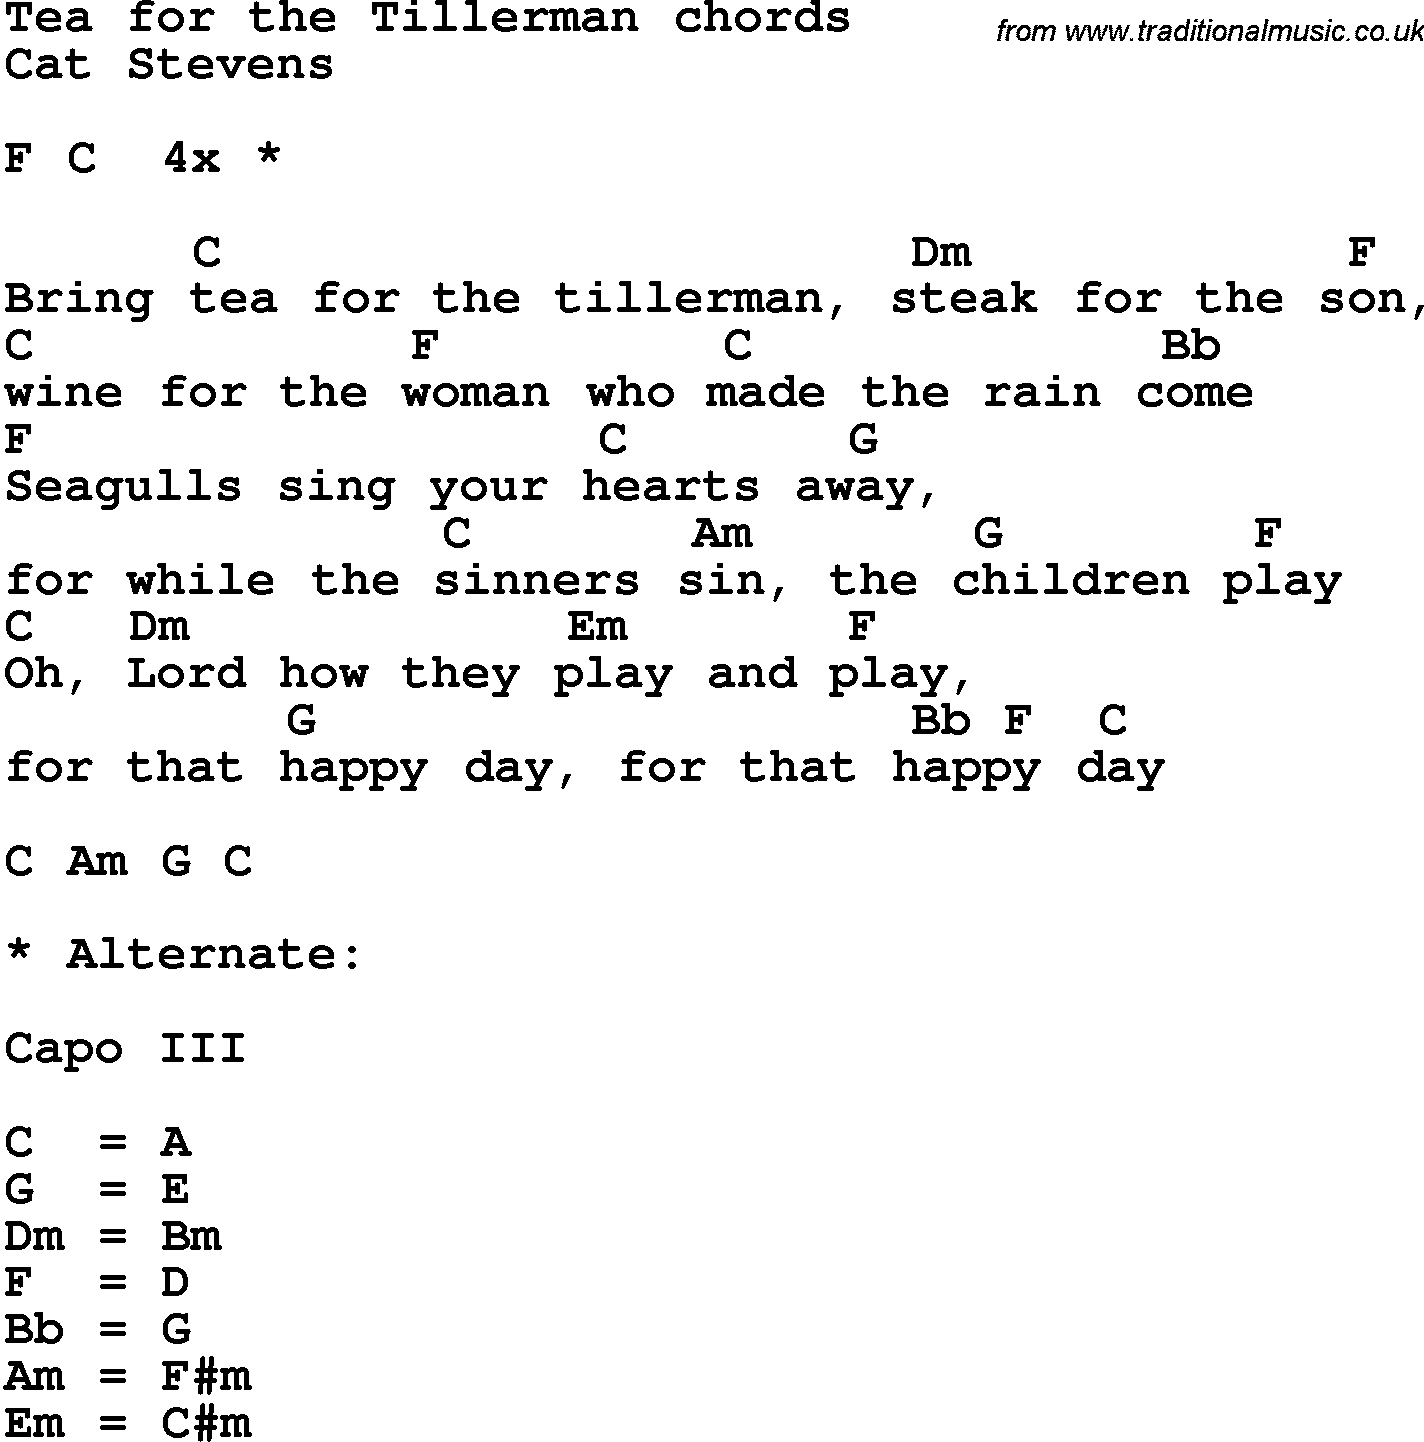 Song Lyrics with guitar chords for Tea For The Tillerman